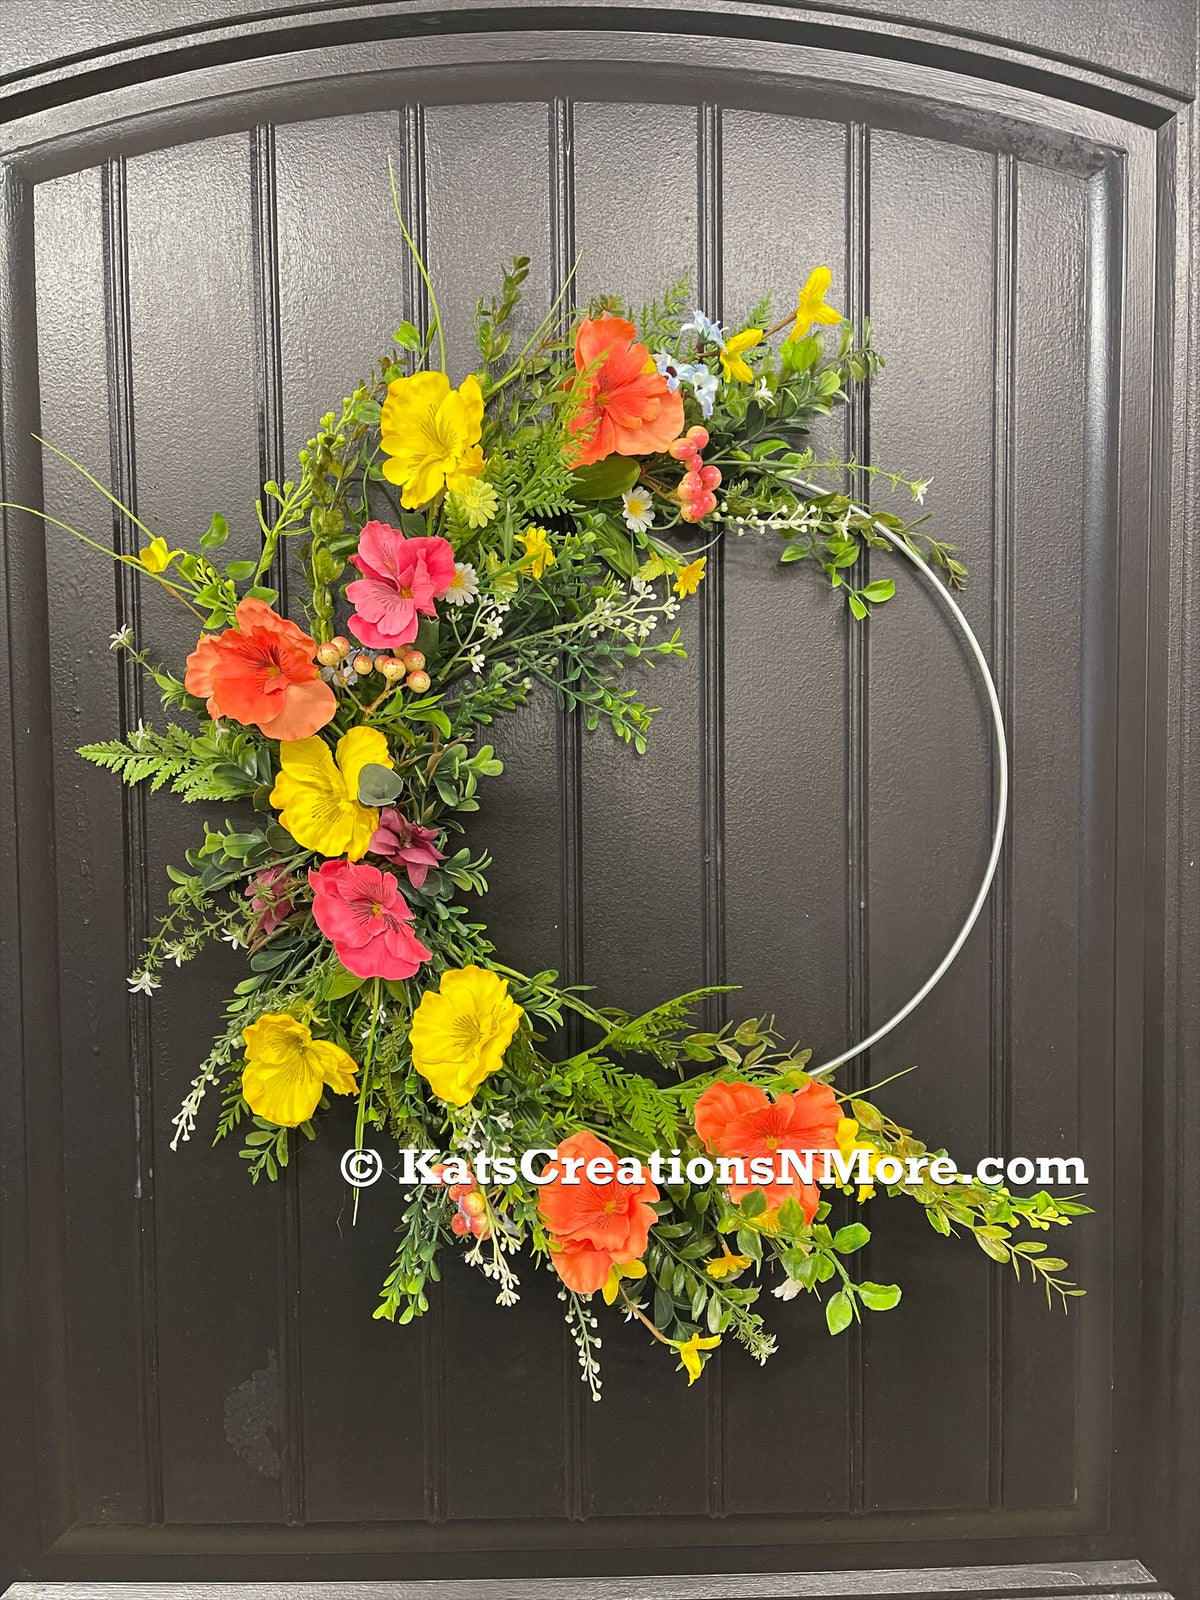 Orange, Pink and Yellow Cosmos Florals with Meadow Greens on a Silver Hoop Wreath on a Black Door